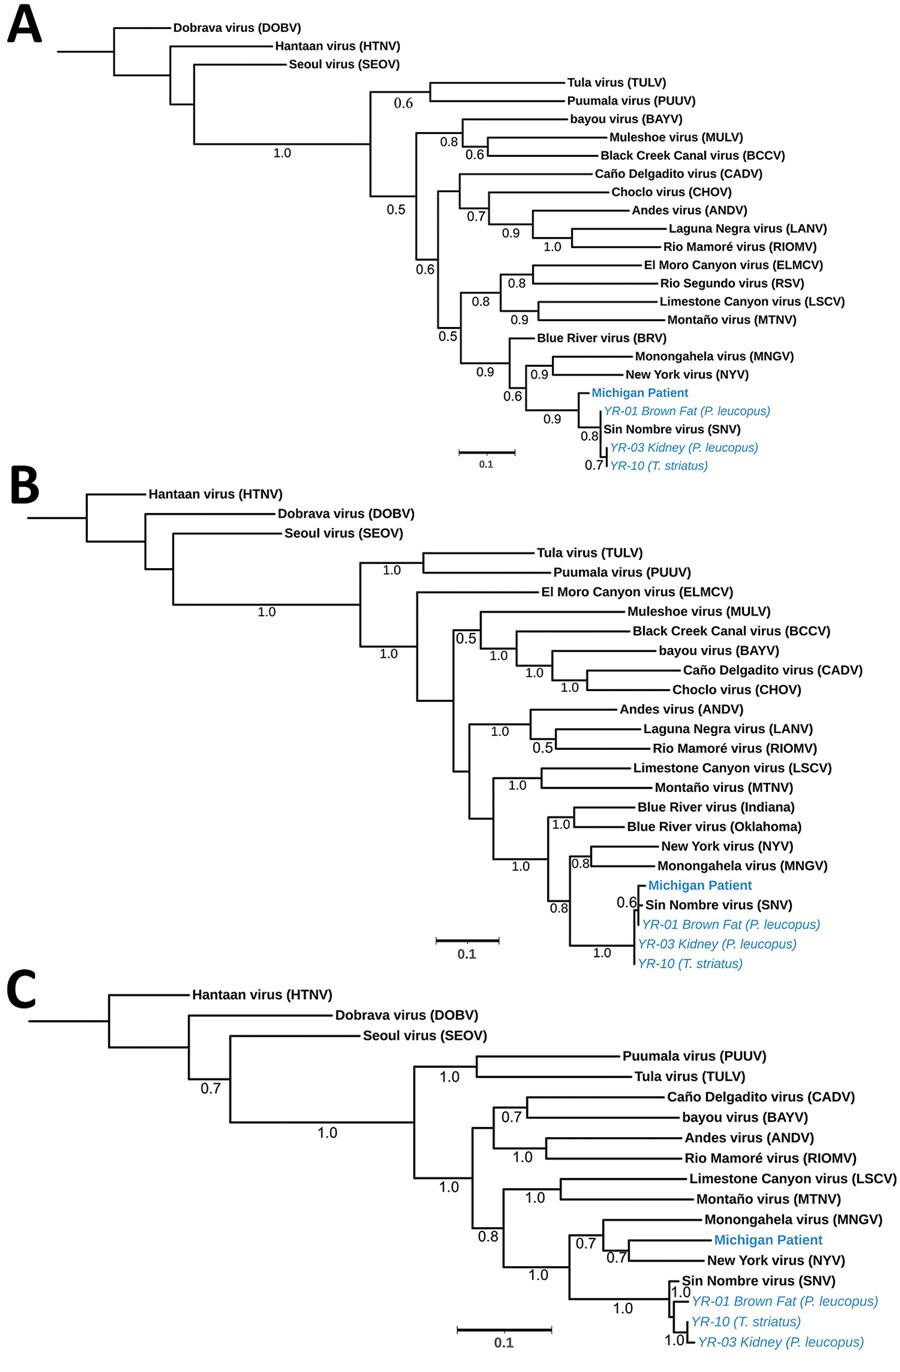 Phylogenetic analysis of orthohantavirus sequence fragments from samples taken from a 65-year-old woman in Michigan, USA, and trapped rodents from the likely site of exposure (blue text). Trees displaying the patient small fragment (481 bp) (A), medium fragment (283 bp) (B), and large fragment (377 bp) (C) were aligned against wild-caught rodents near site of exposure and reference sequences. Numbers along branches indicate bootstrap values of 500 replicates. GenBank accession numbers: human patient, OR428177–9; YR-01, brown adipose fat from a Peromyscus leucopus white-footed mouse, OR428180–2; YR-03, kidney tissue from a P. leucopus mouse, OR428183–5; and YR-10, lung tissue from a Tamias striatus Eastern chipmunk, OR428186–8. Scale bars indicate number of substitutions per site.